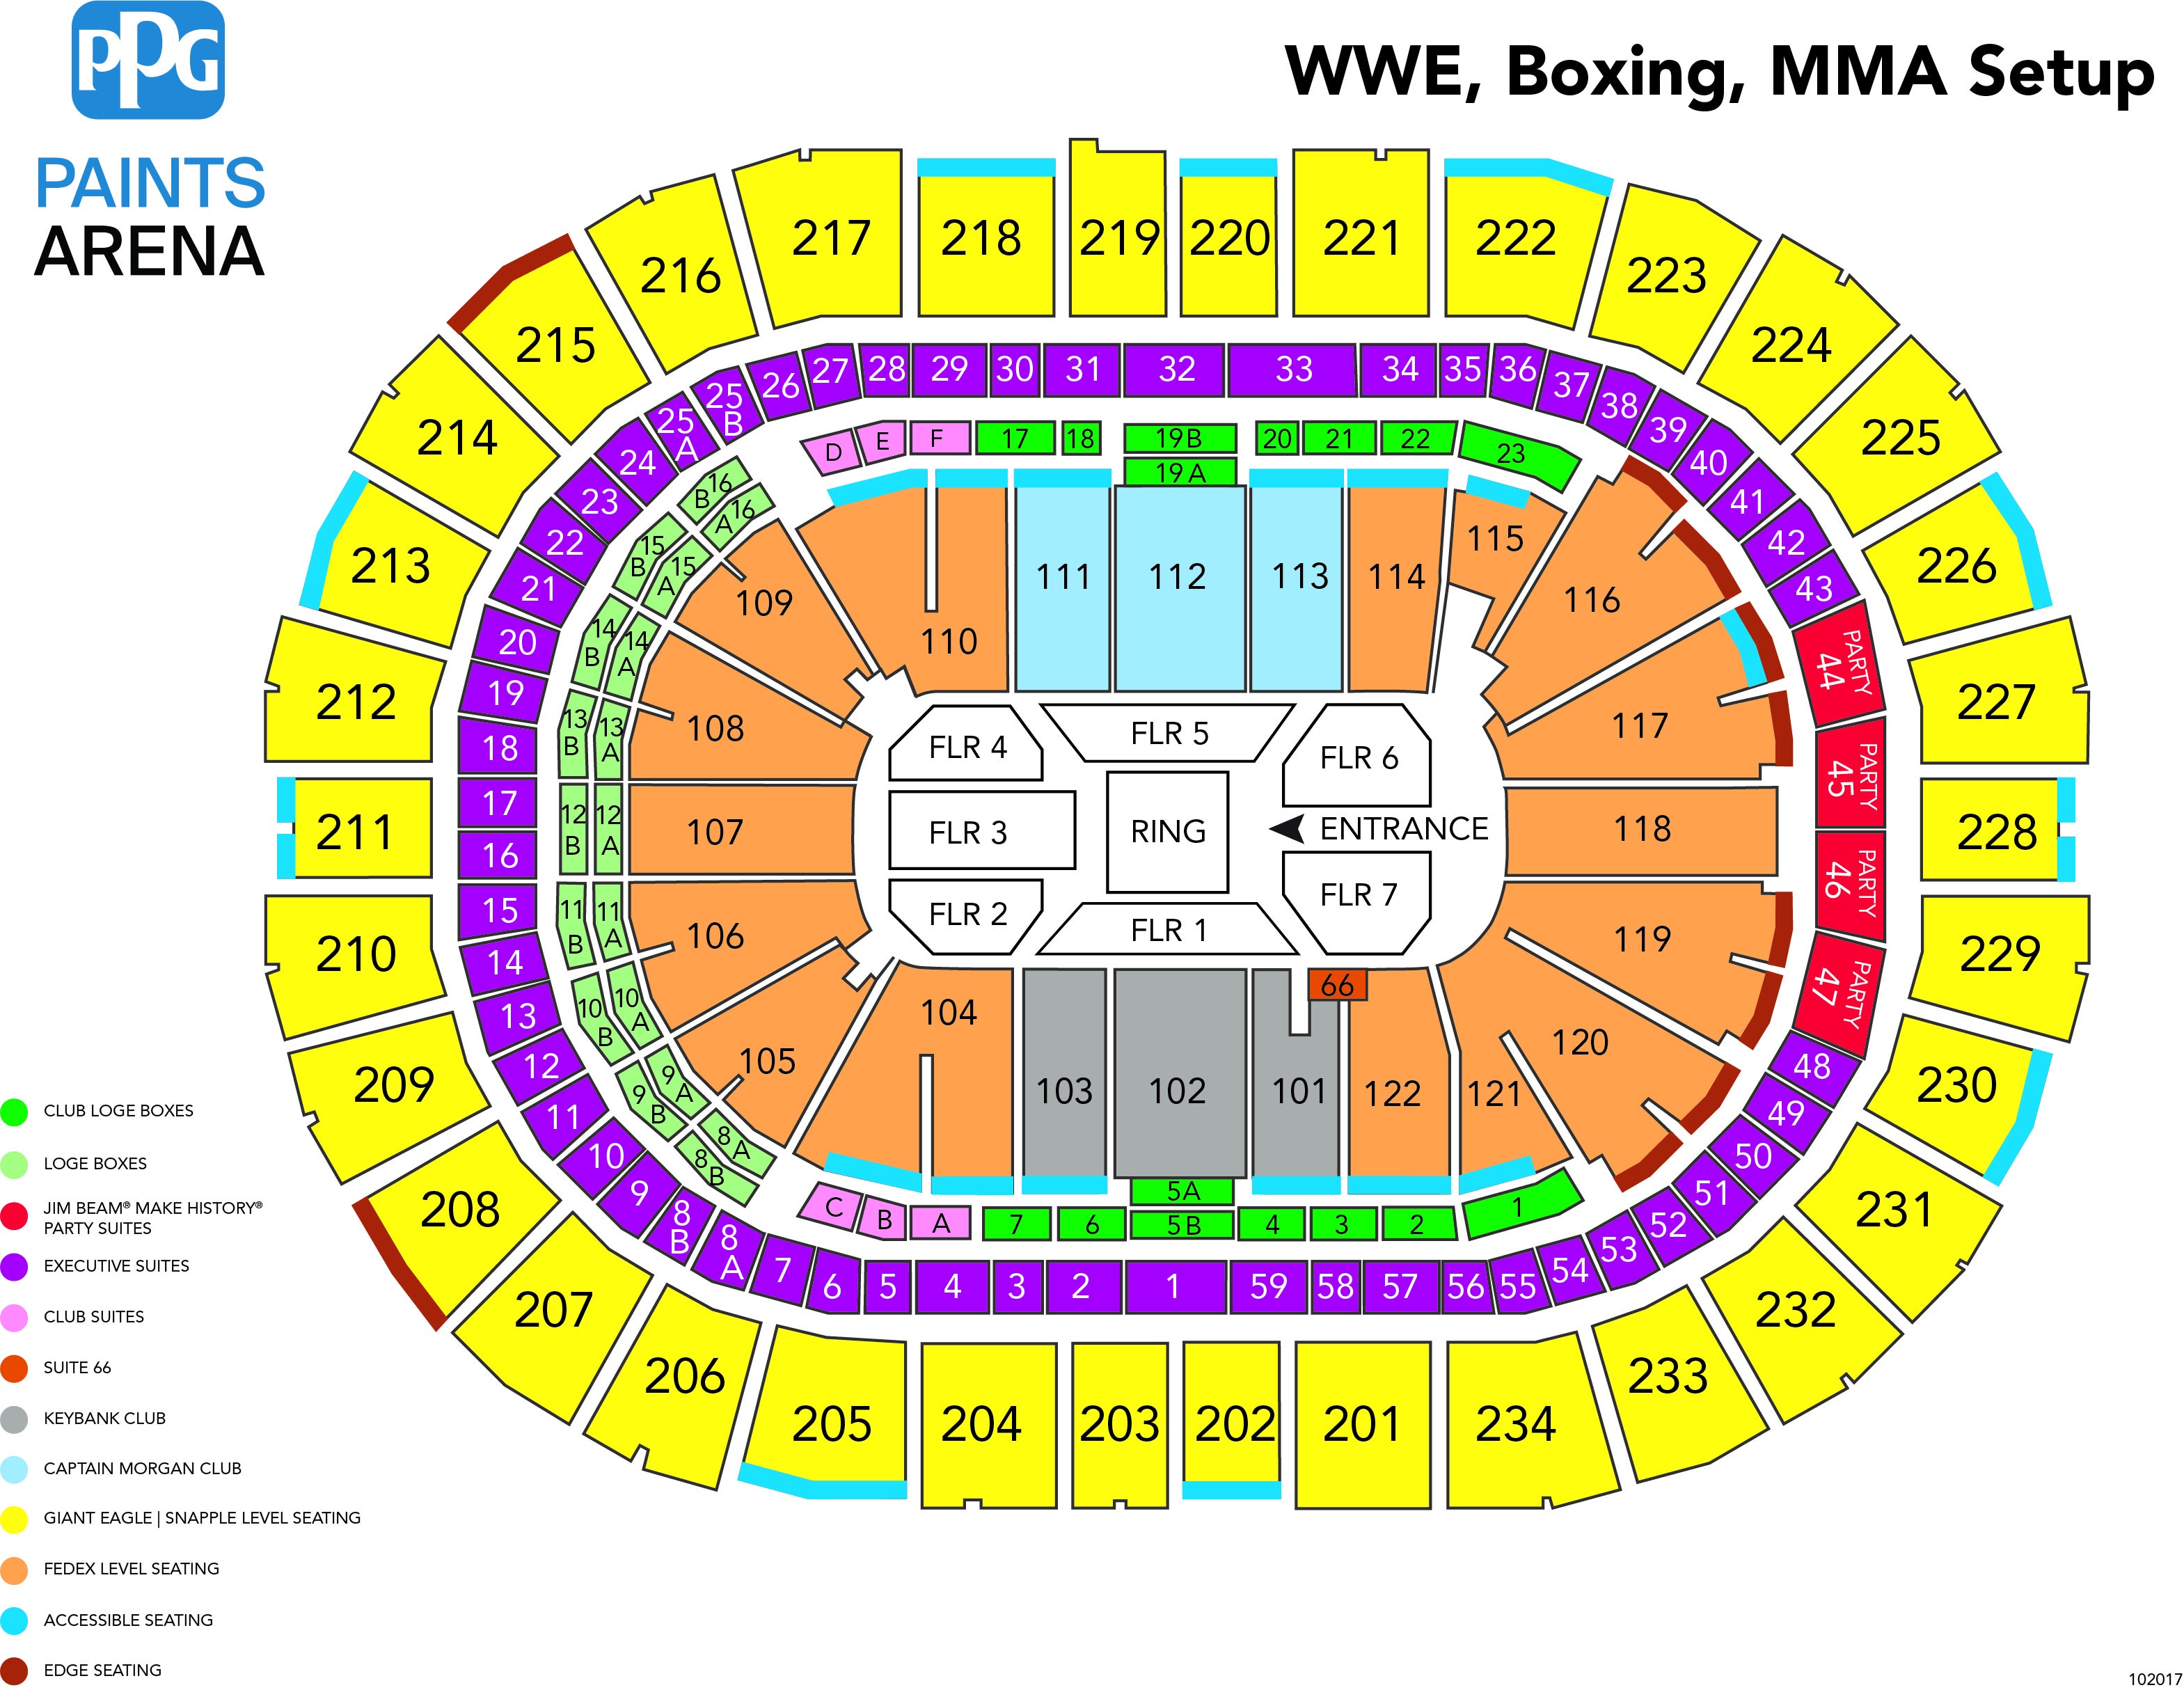 ppg paints arena wwe seating chart - Part.tscoreks.org